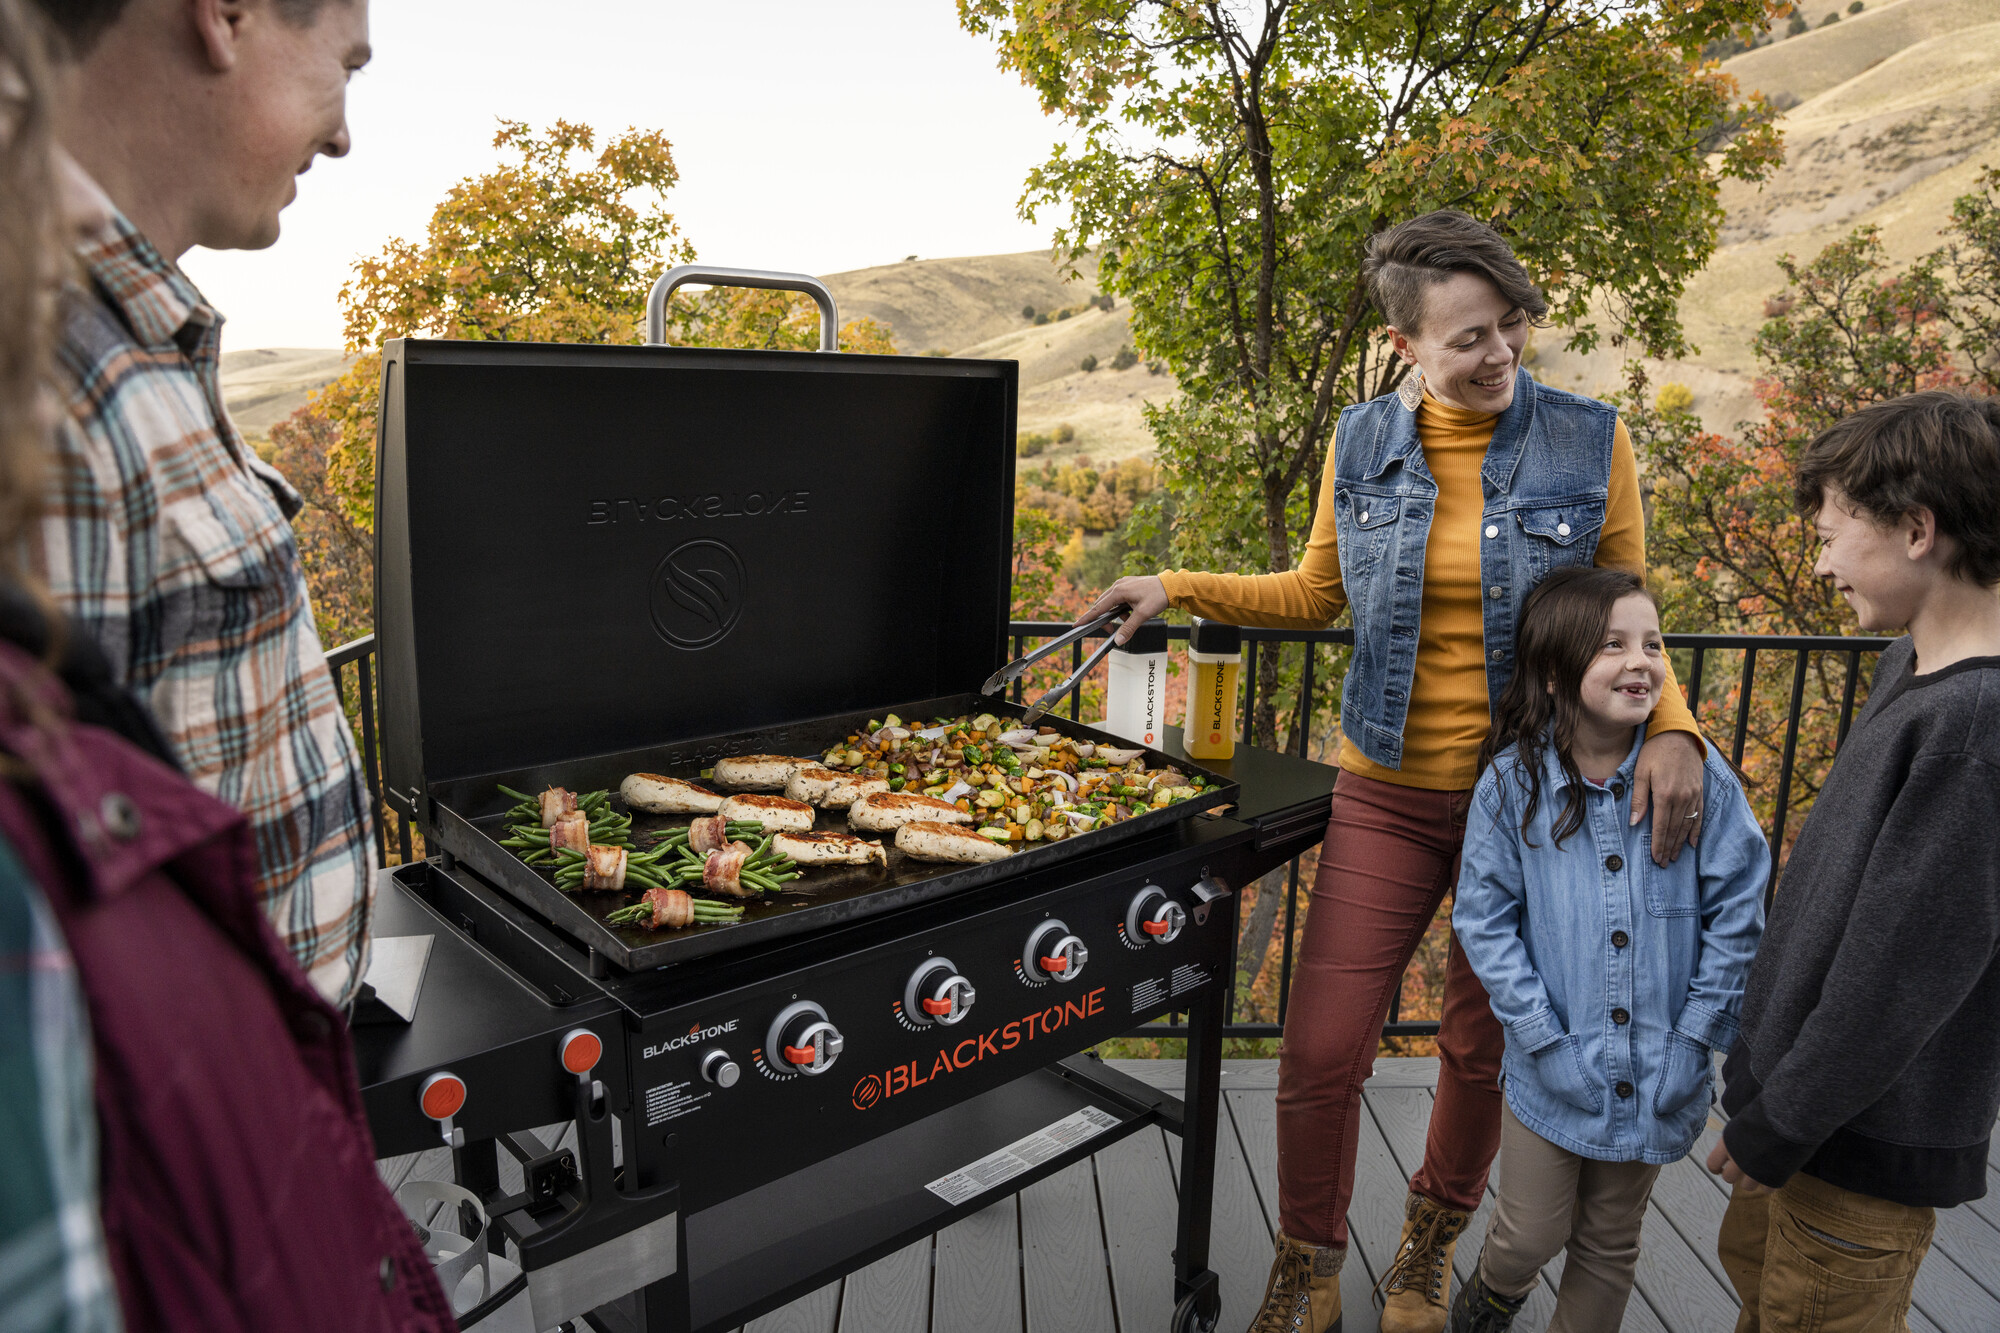 Blackstone BBQ Griddle launches in the UK in Partnership with JDM Products